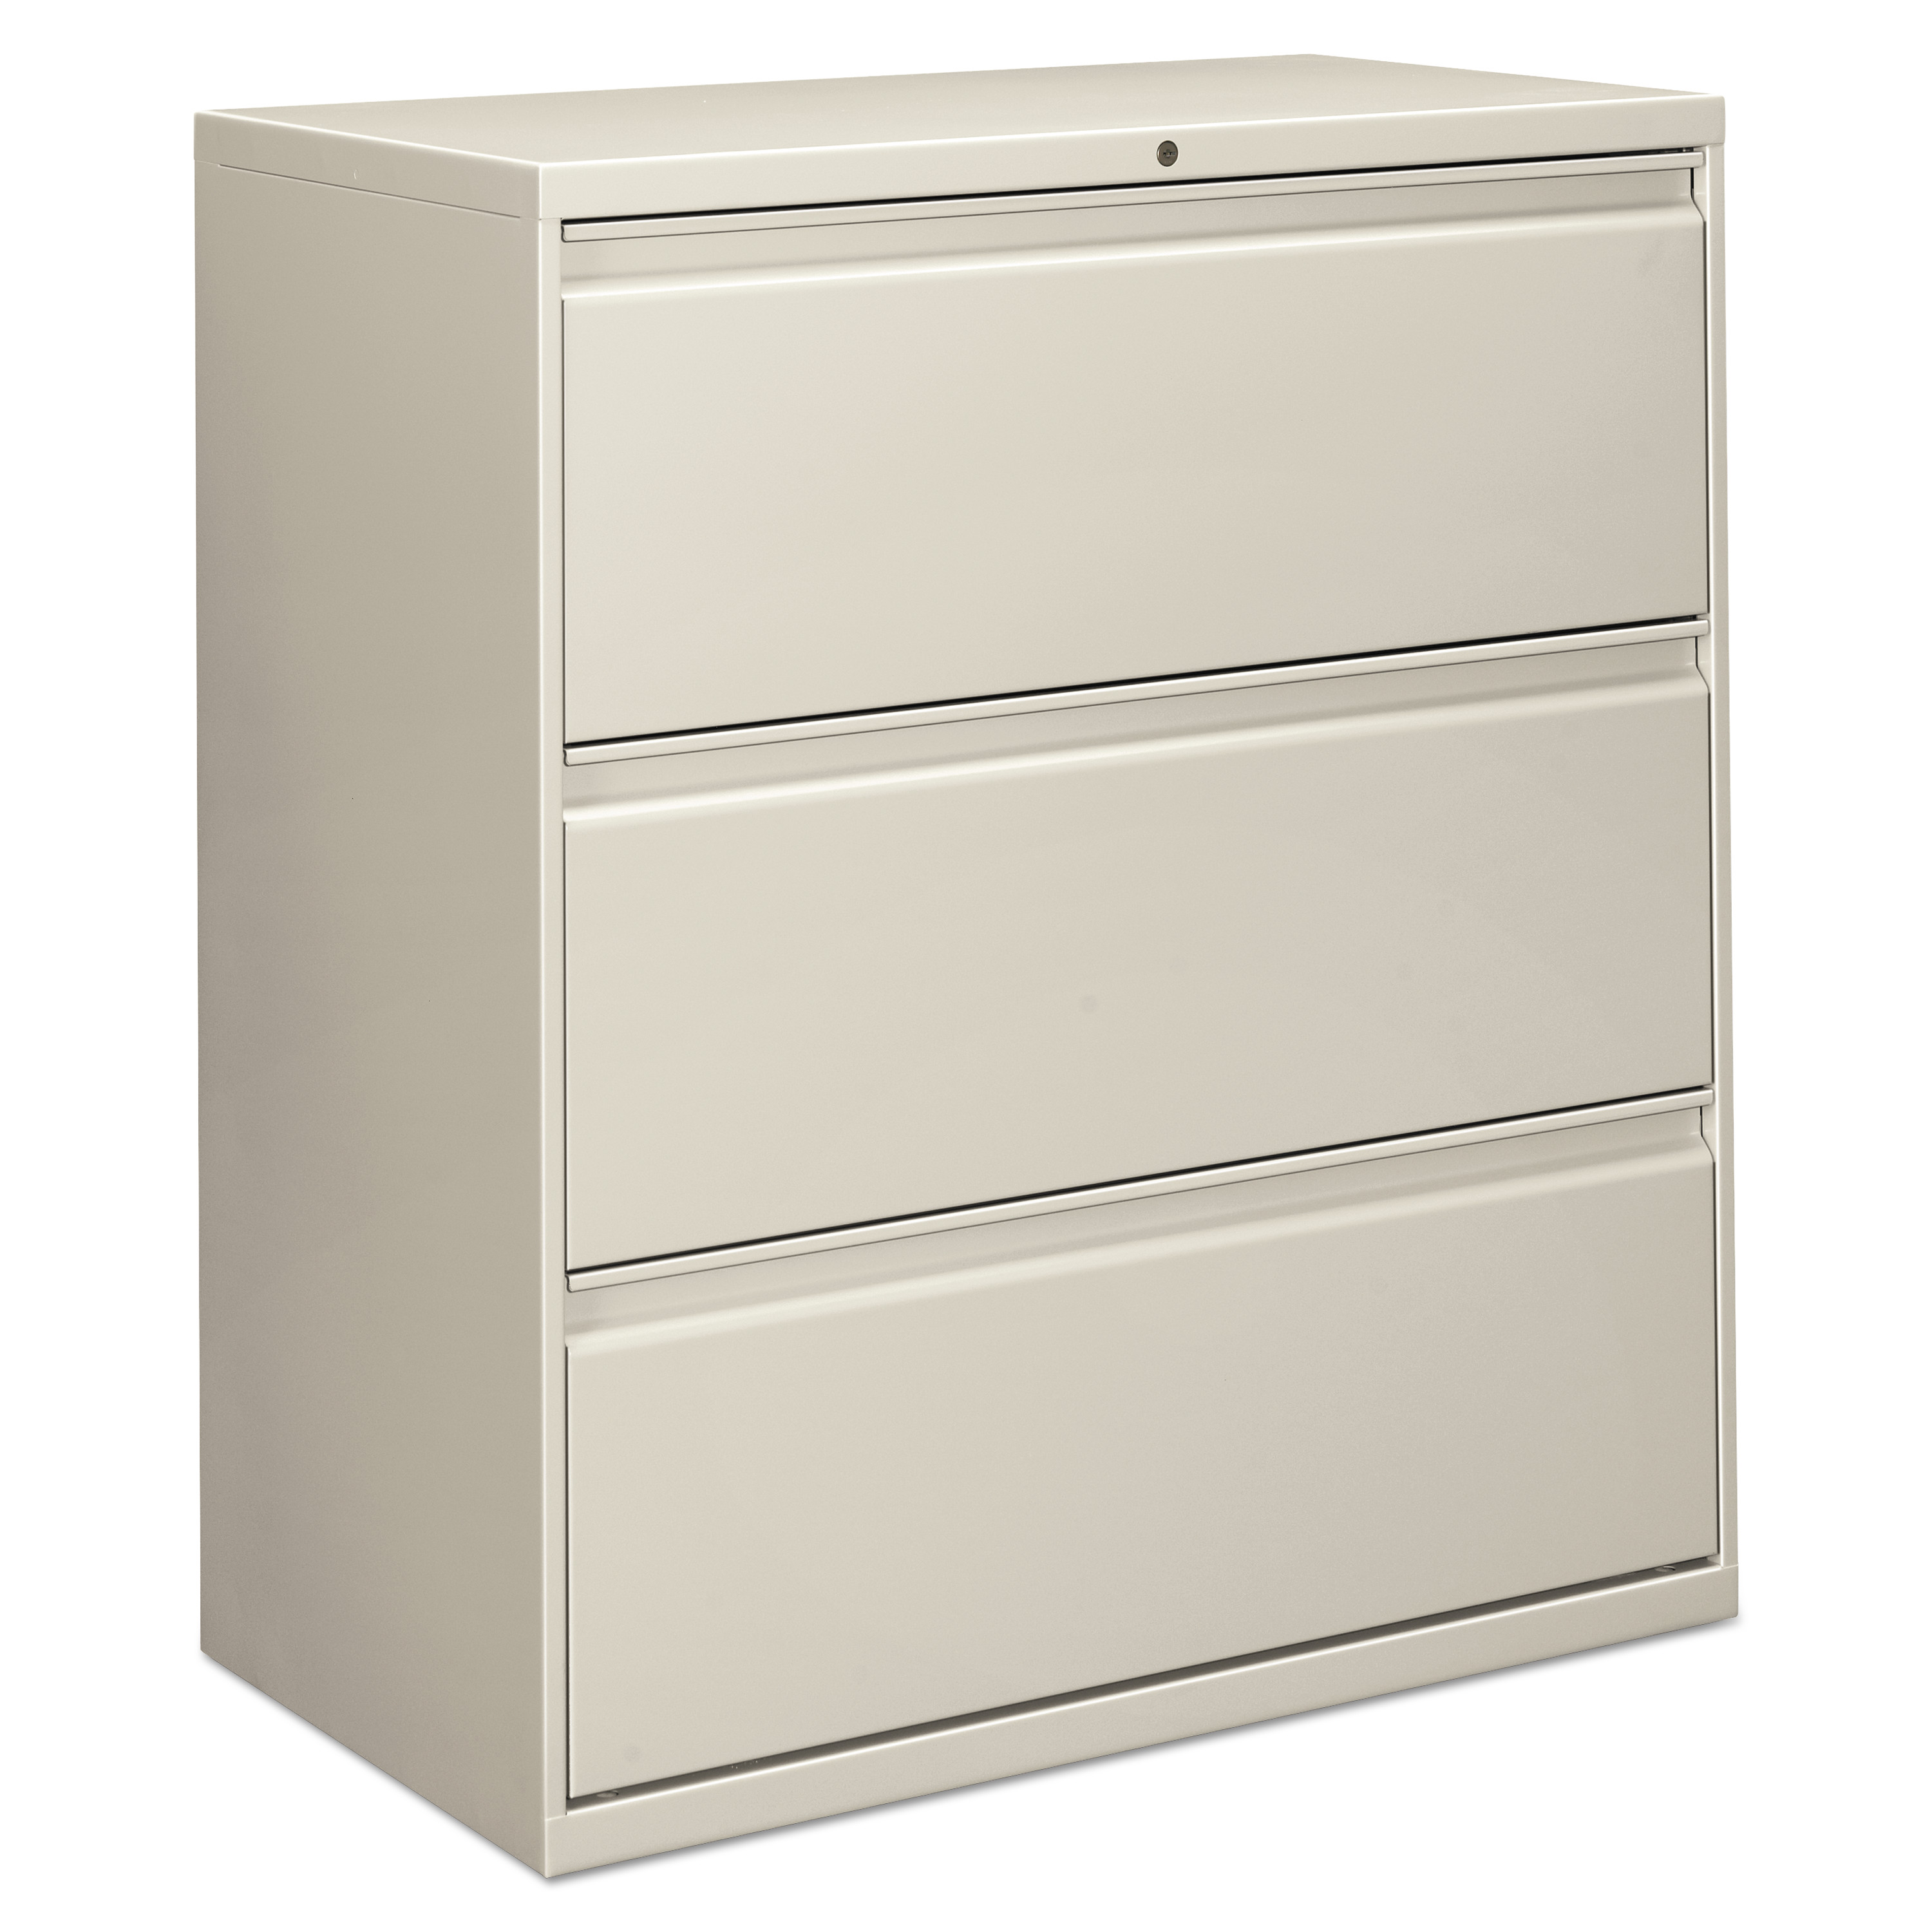 Three-Drawer Lateral File Cabinet, 36w x 18d x 39 1/2h, Light Gray